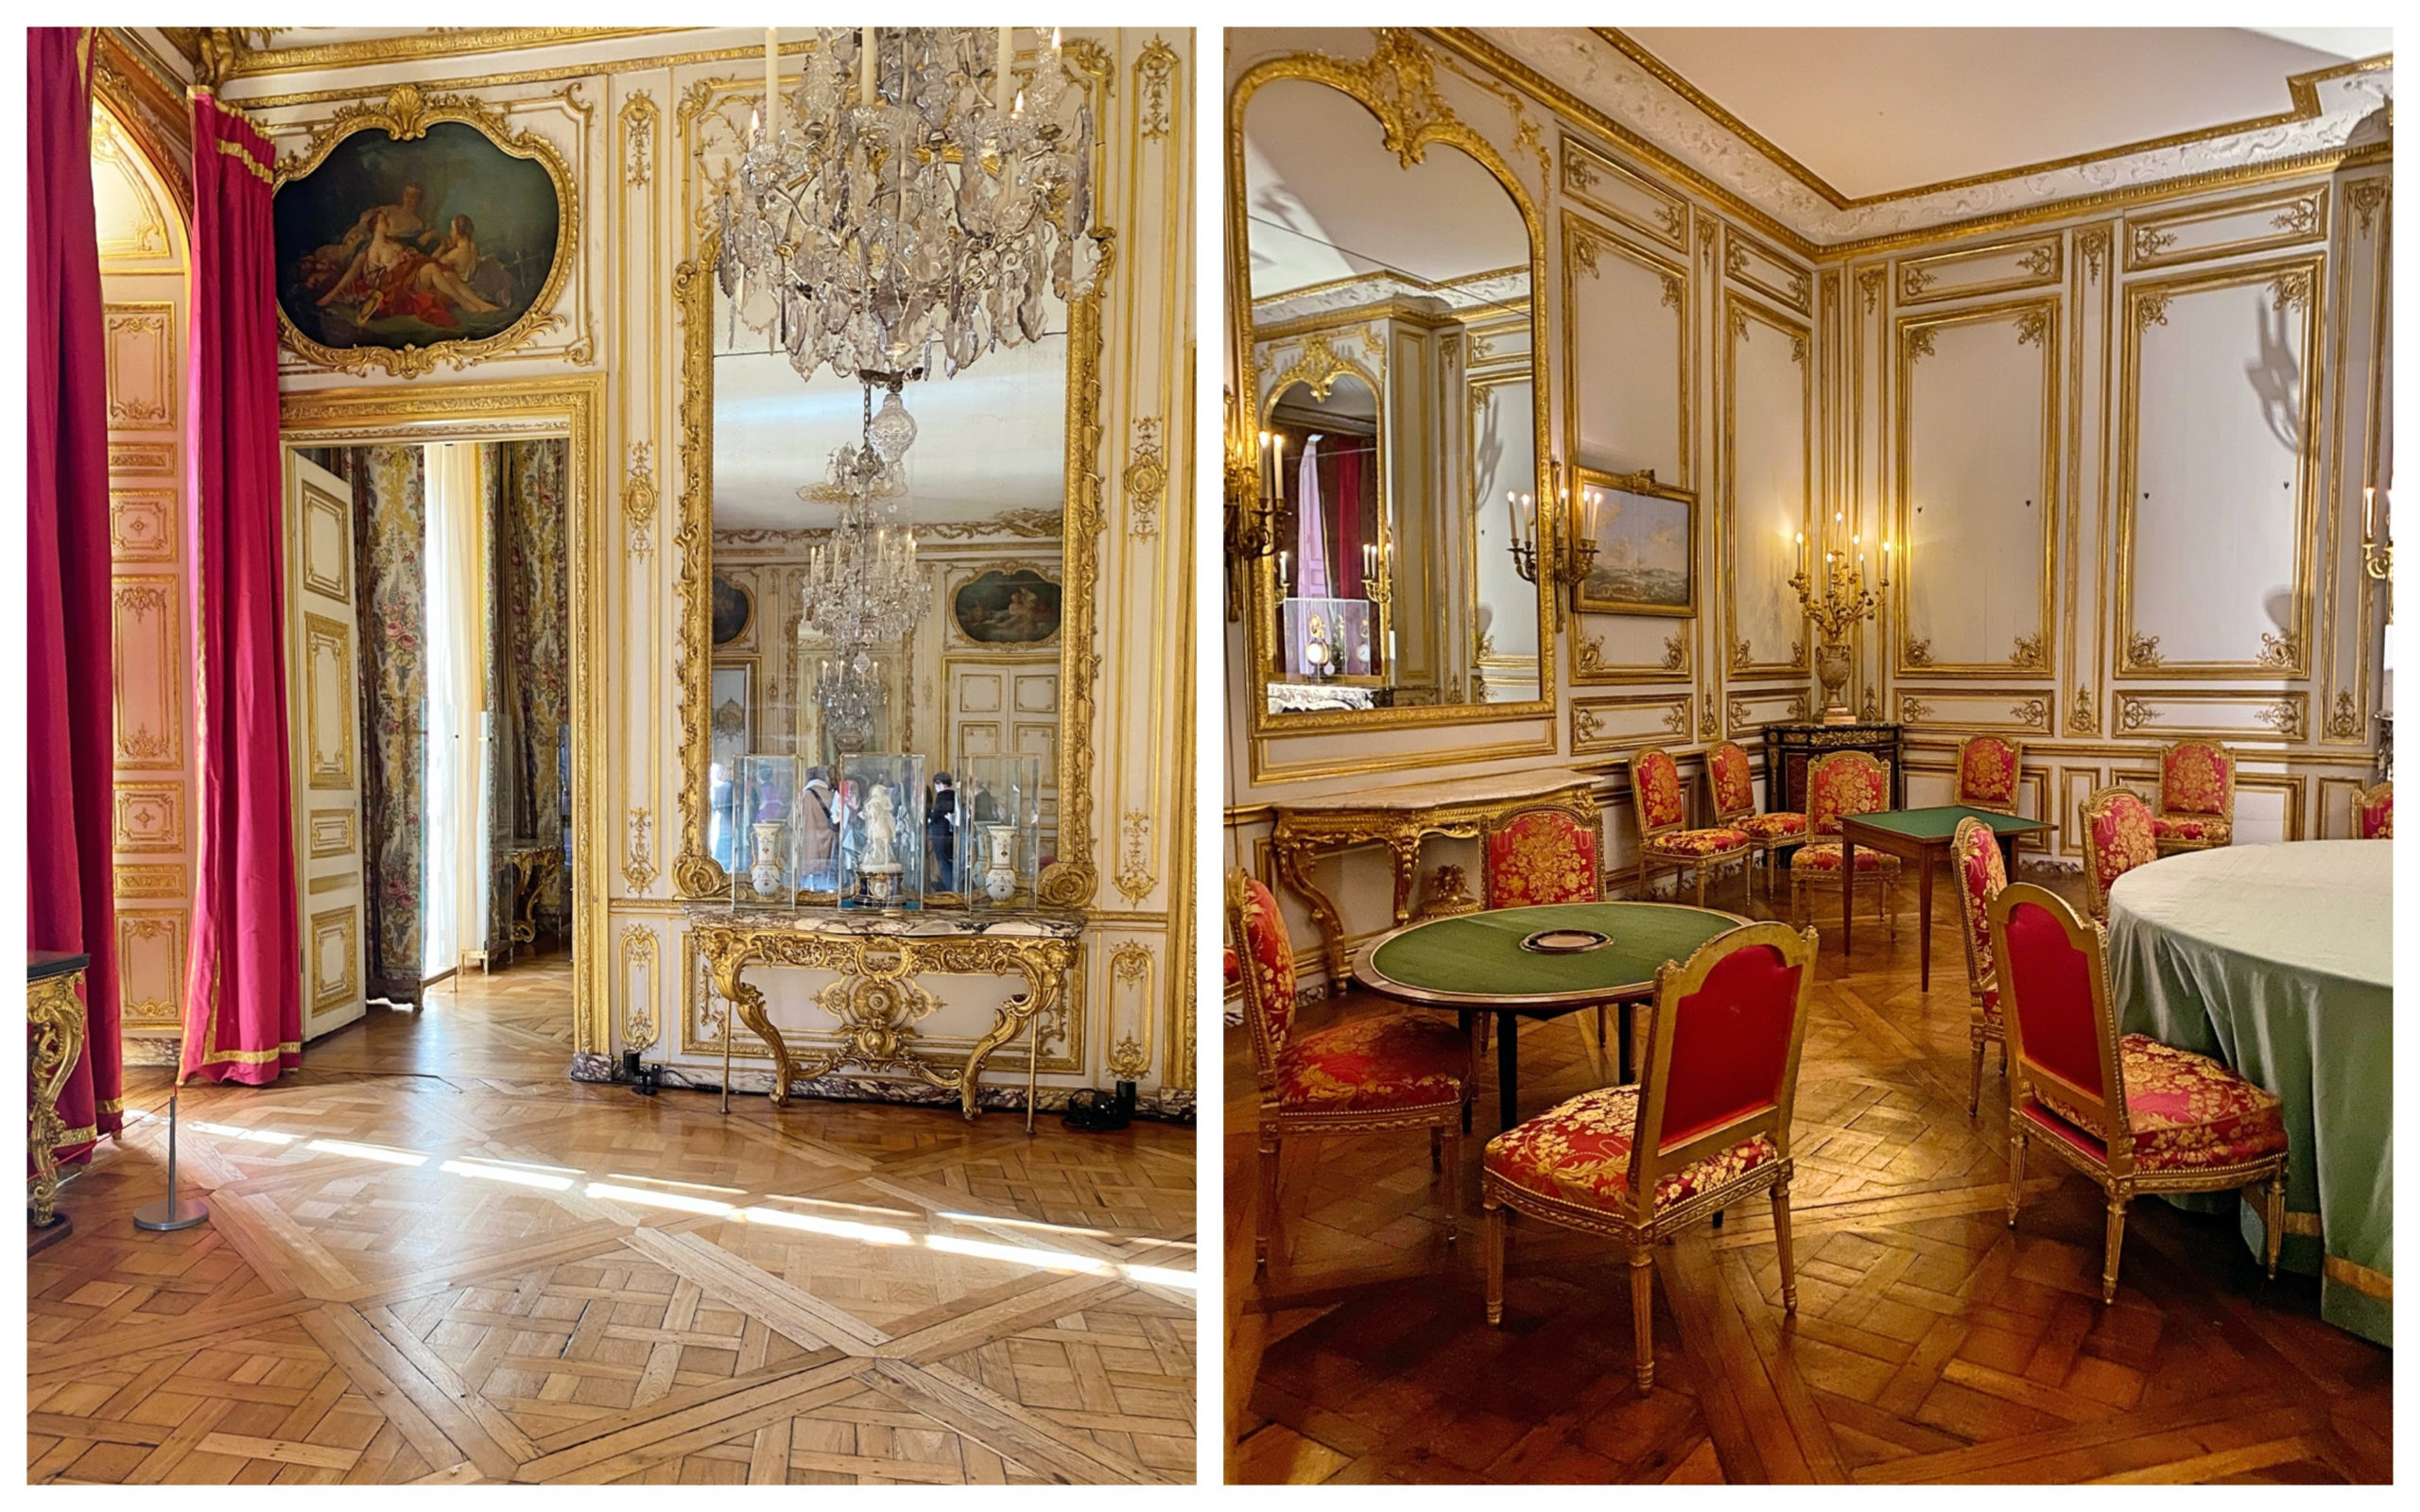 Private Apartments of the King, Versailles